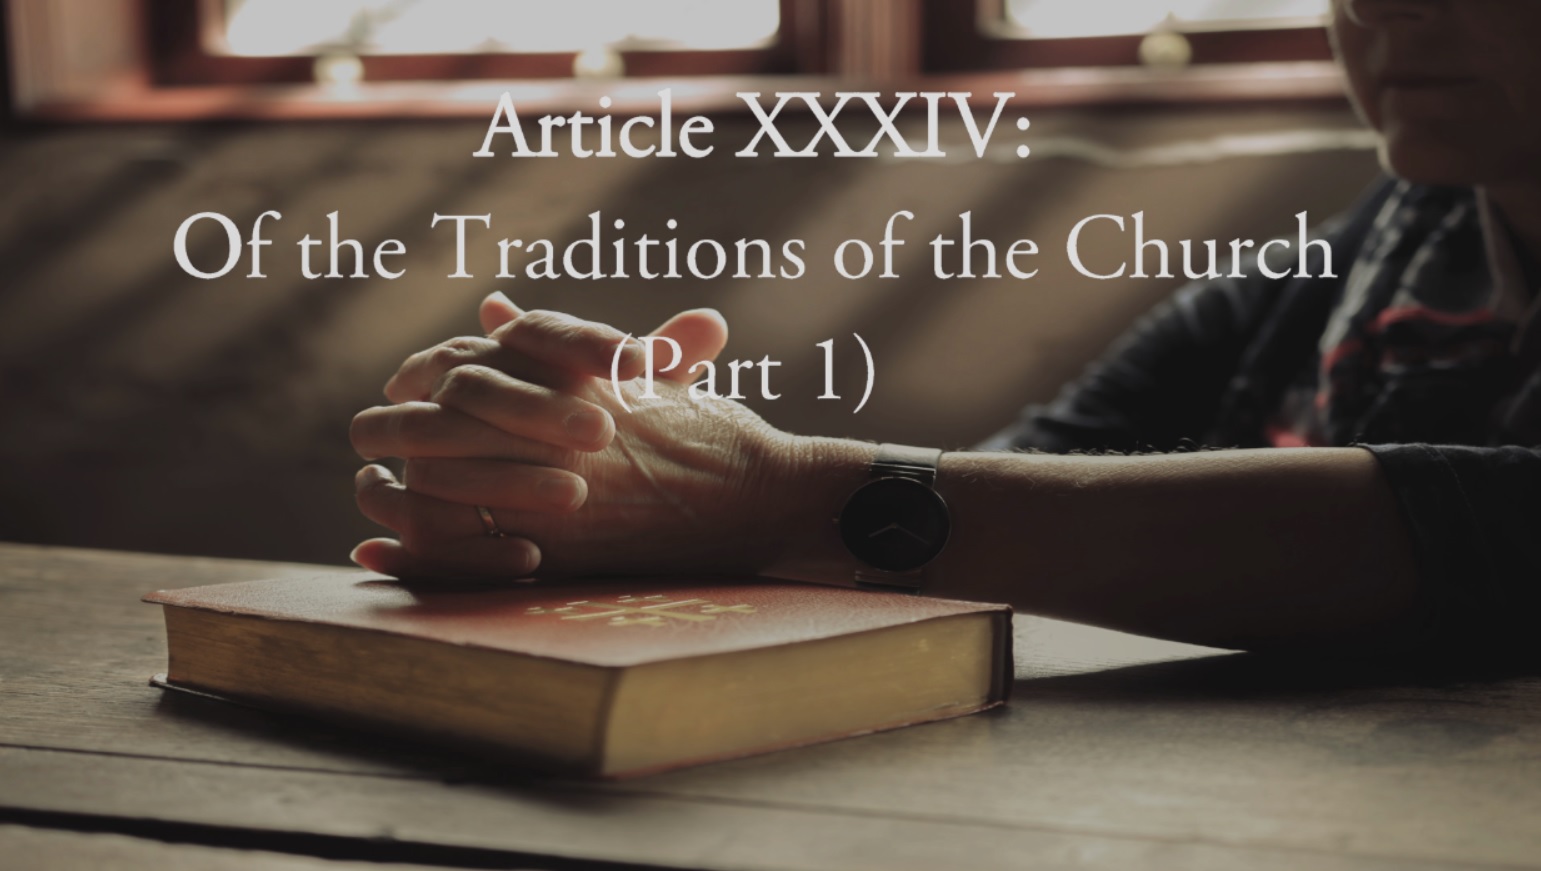 Article XXXIV: of the Traditions of the Church (Part 1)